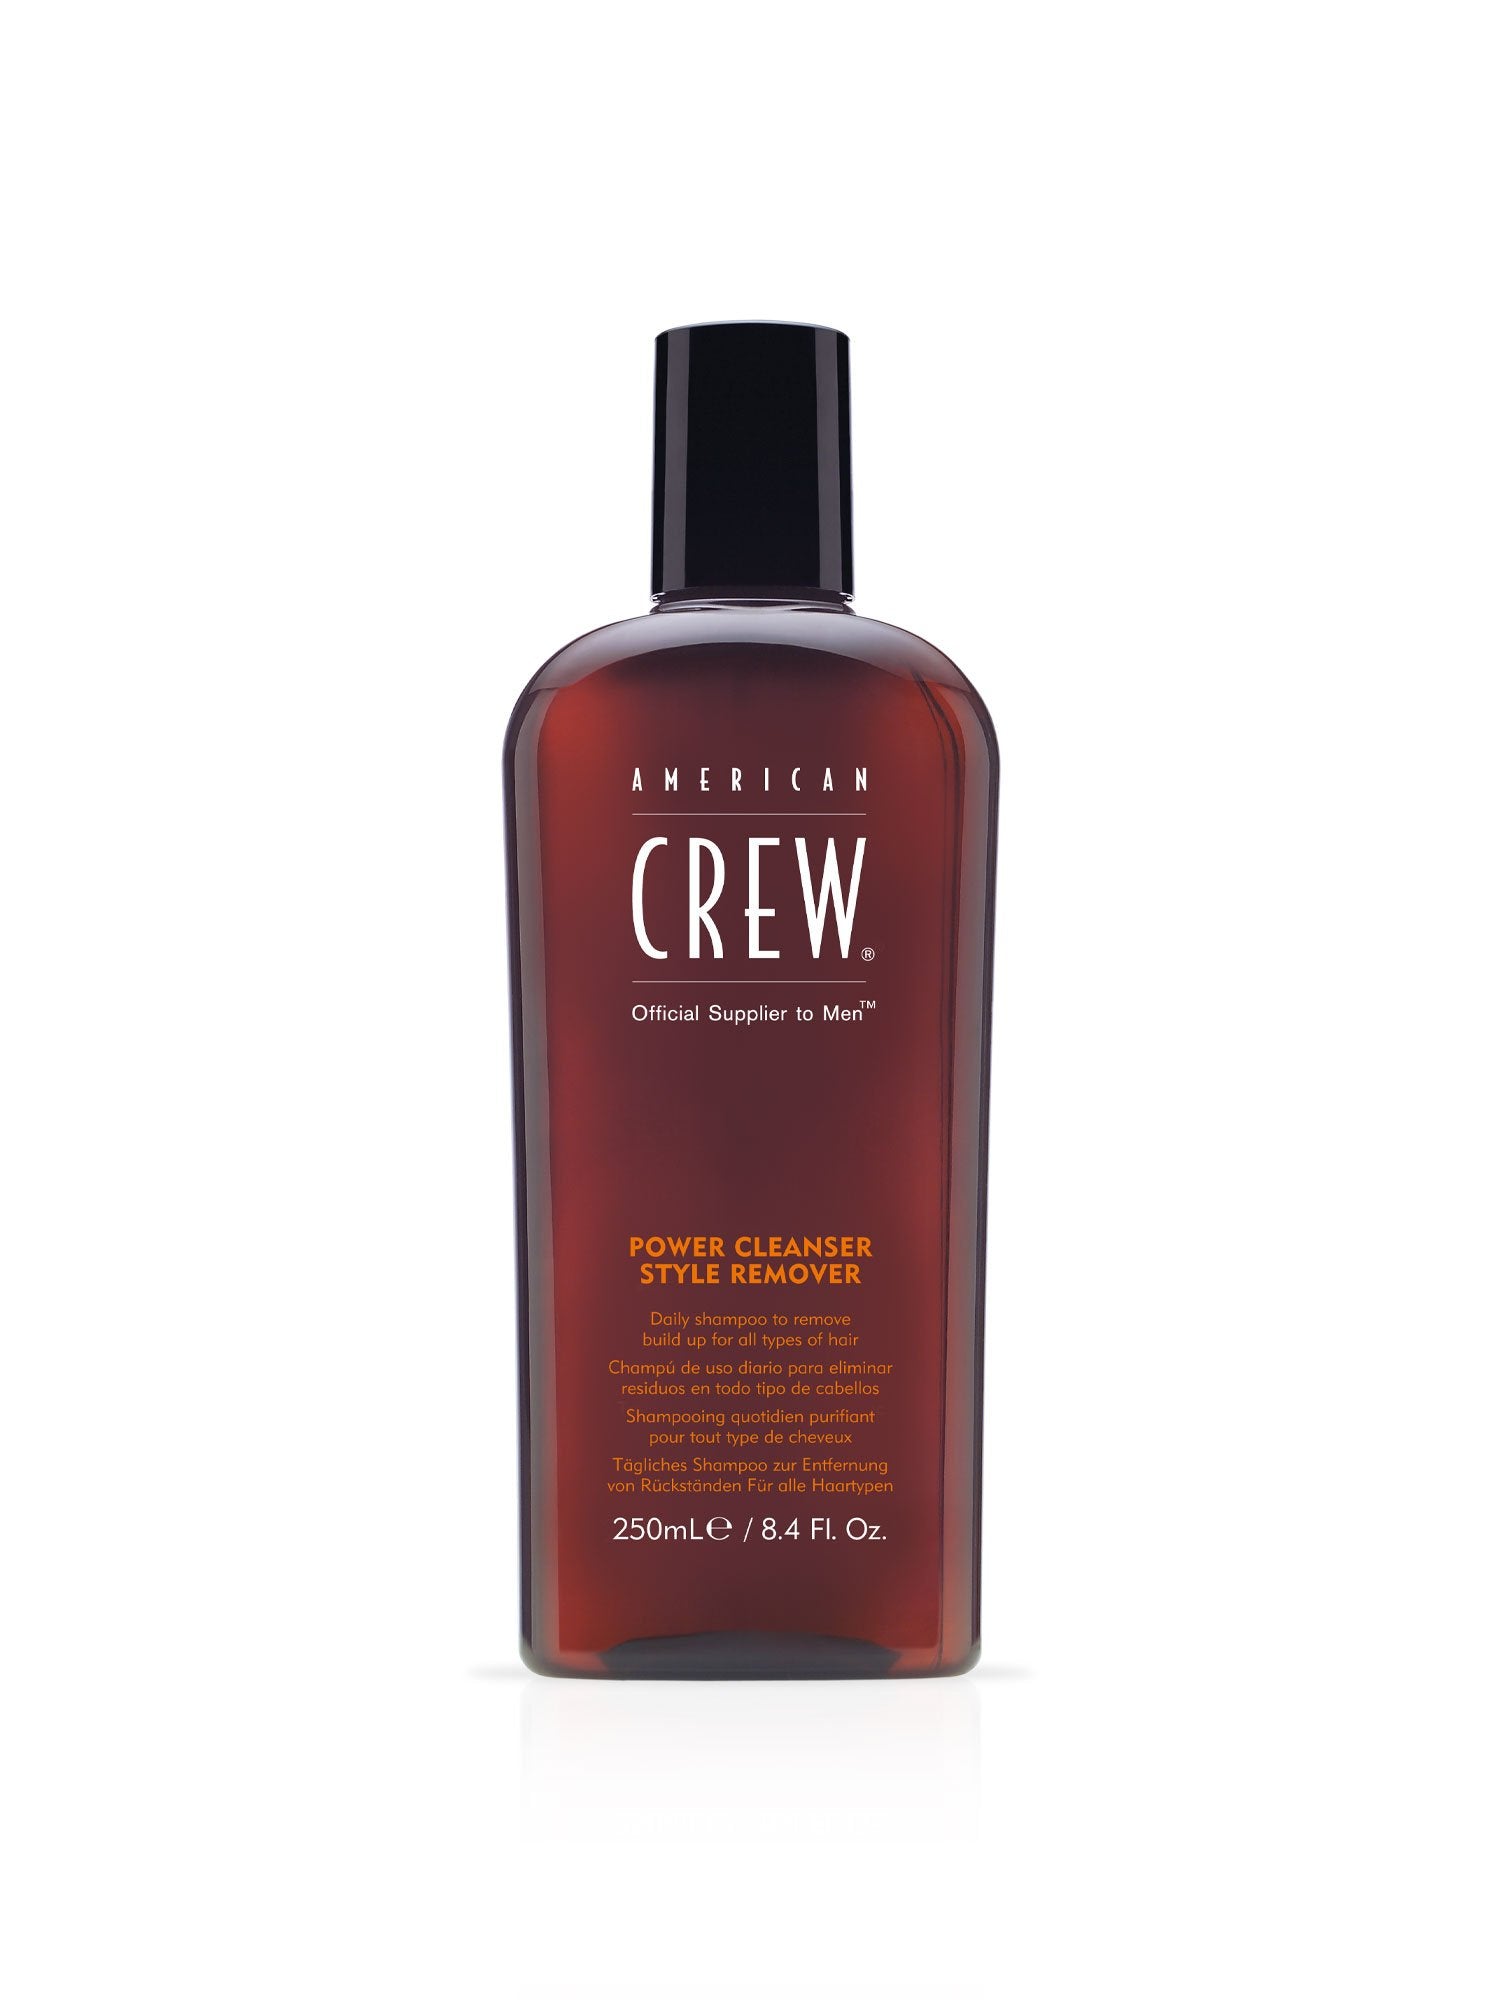 American Crew - Power Cleanser Style Remover - 250ml - by American Crew |ProCare Outlet|